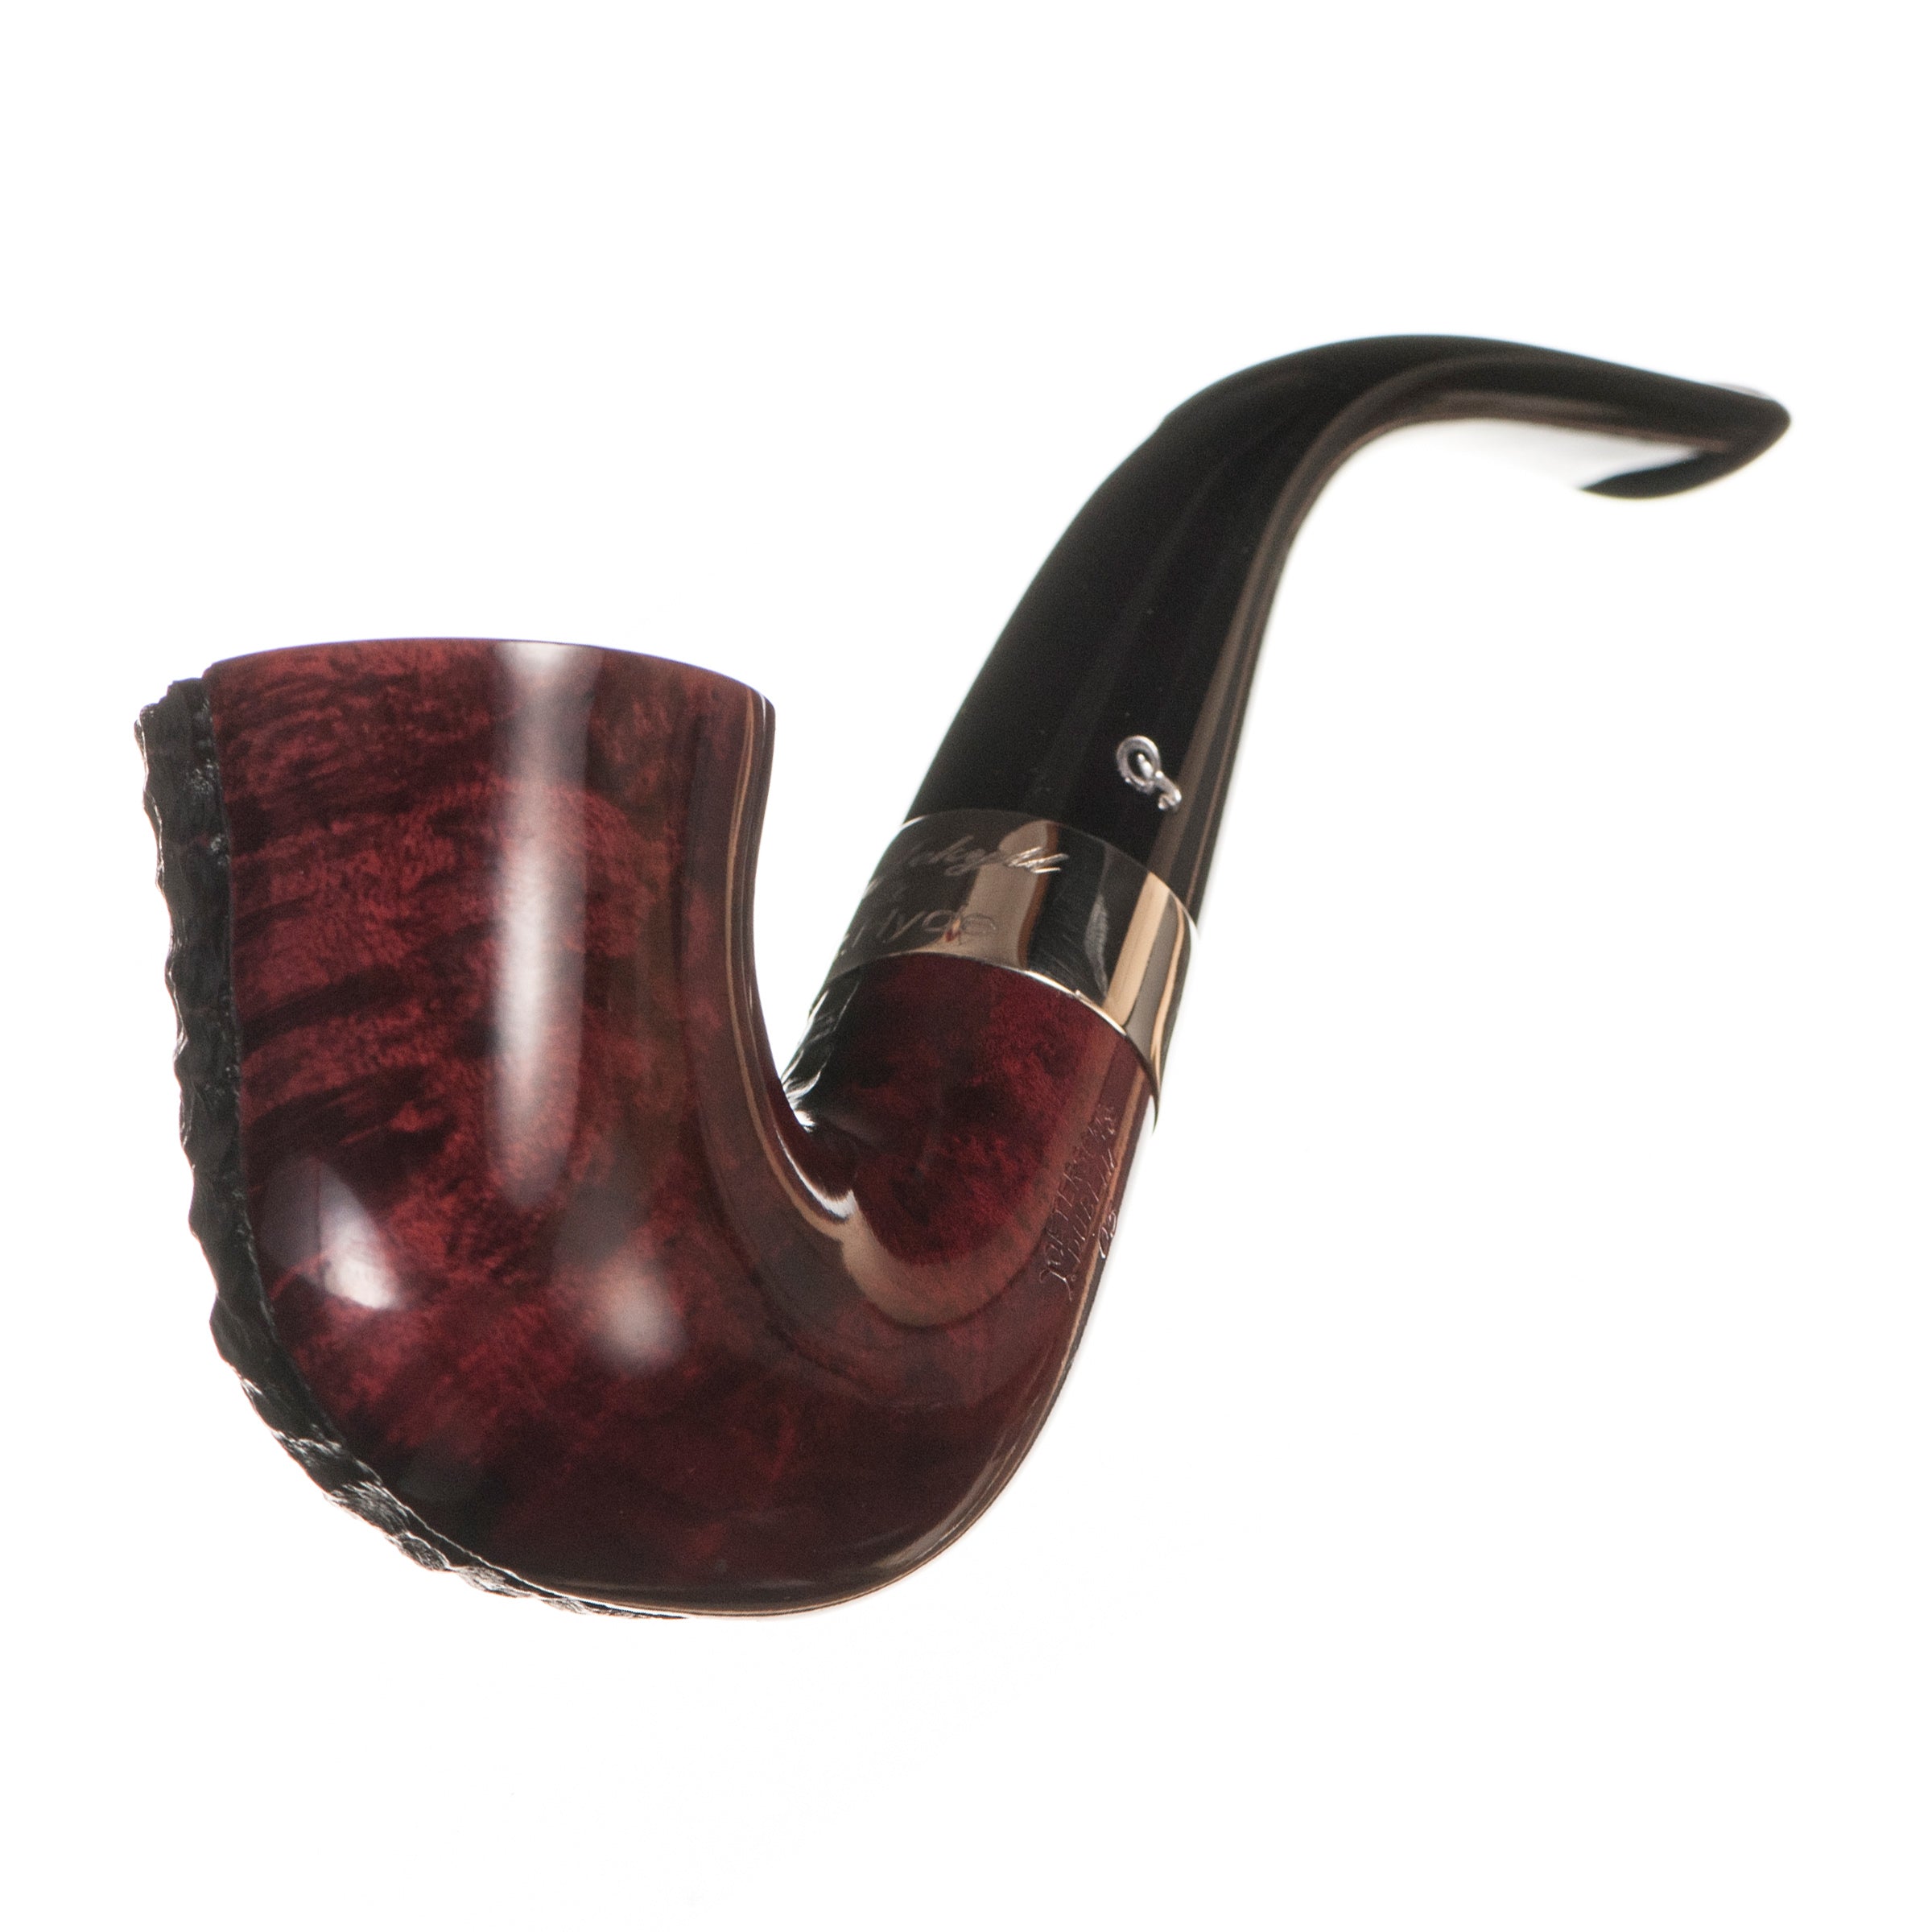 Peterson Jekyll & Hyde 05 Smooth/Rustic Pipe